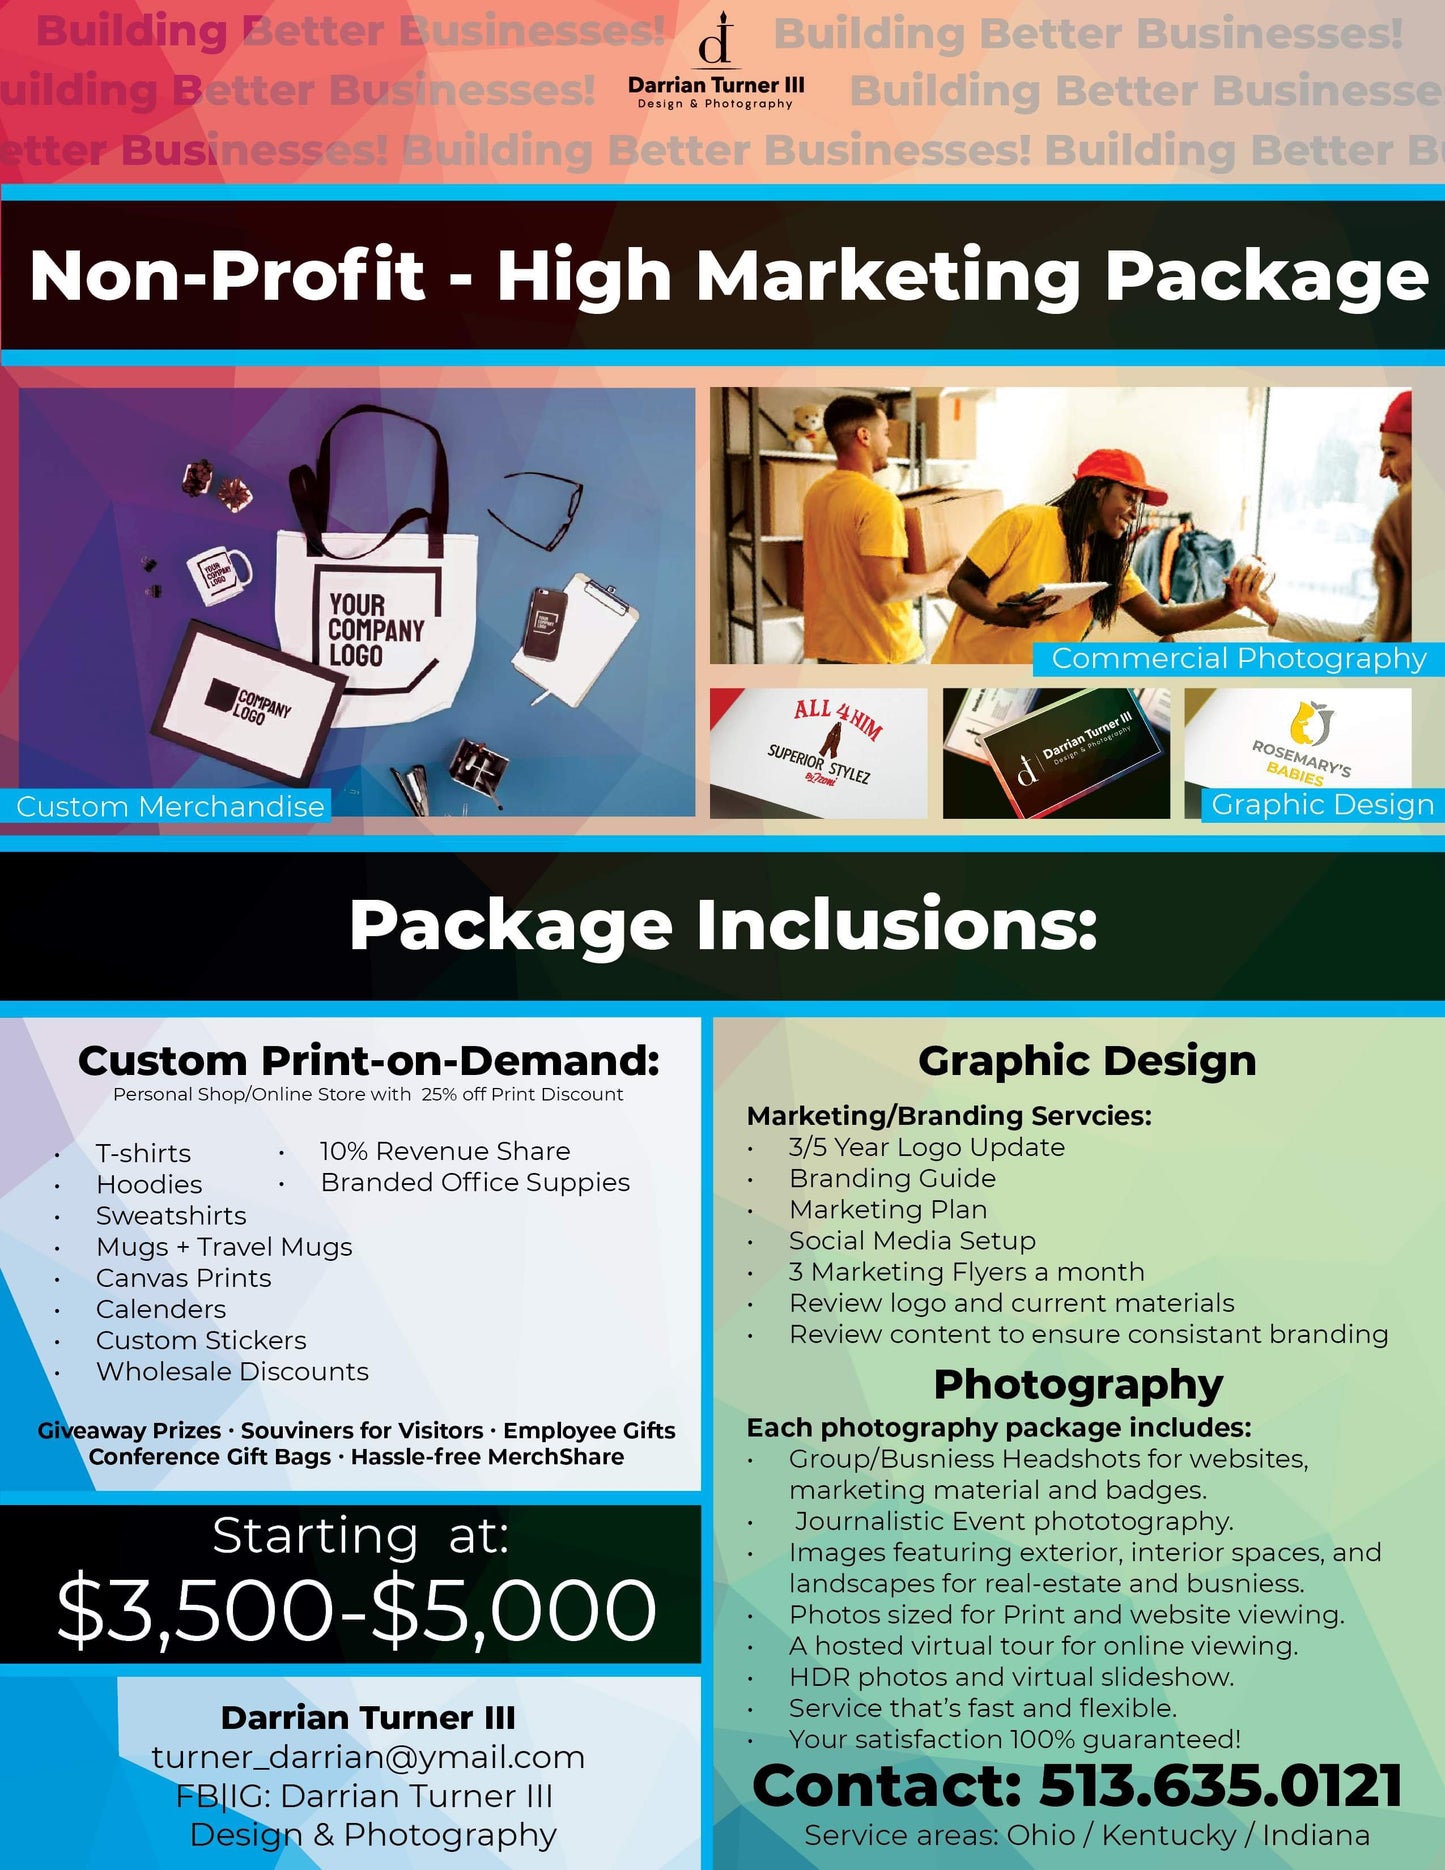 Non-Profit - High Marketing Package